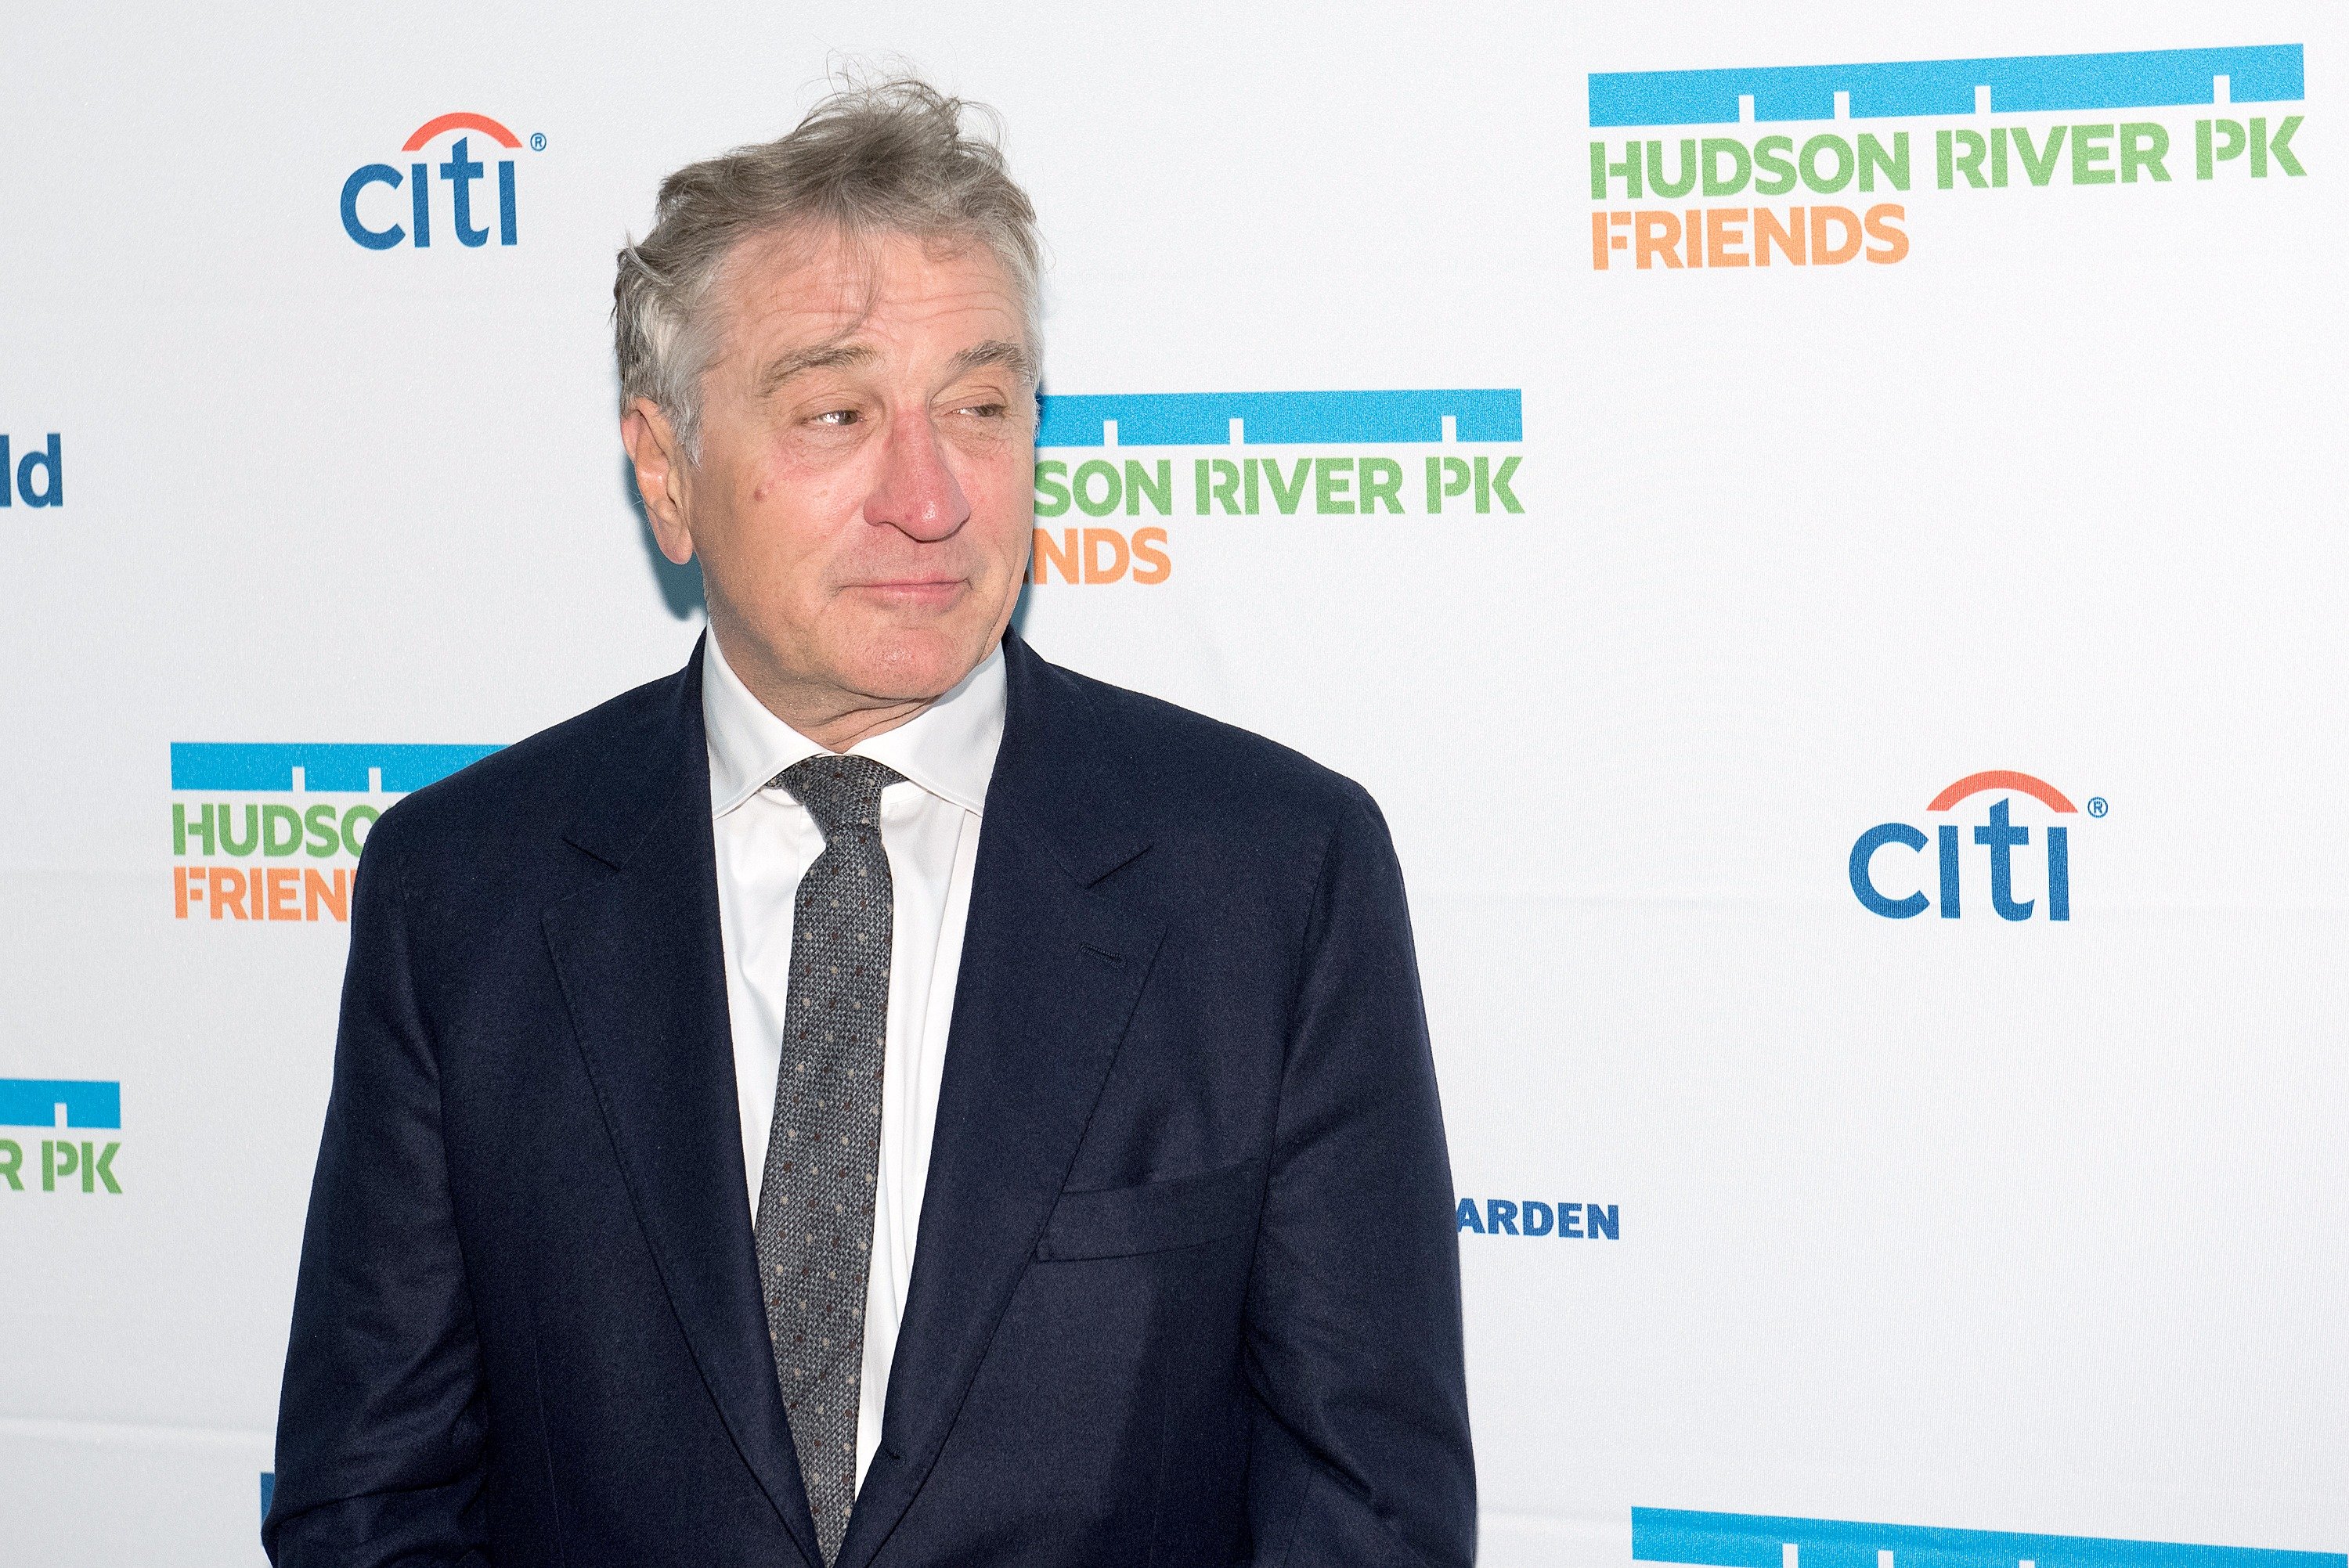 Robert De Niro at the 2017 Hudson River Park Annual Gala on October 12, 2017 in New York City. | Photo: Getty Images